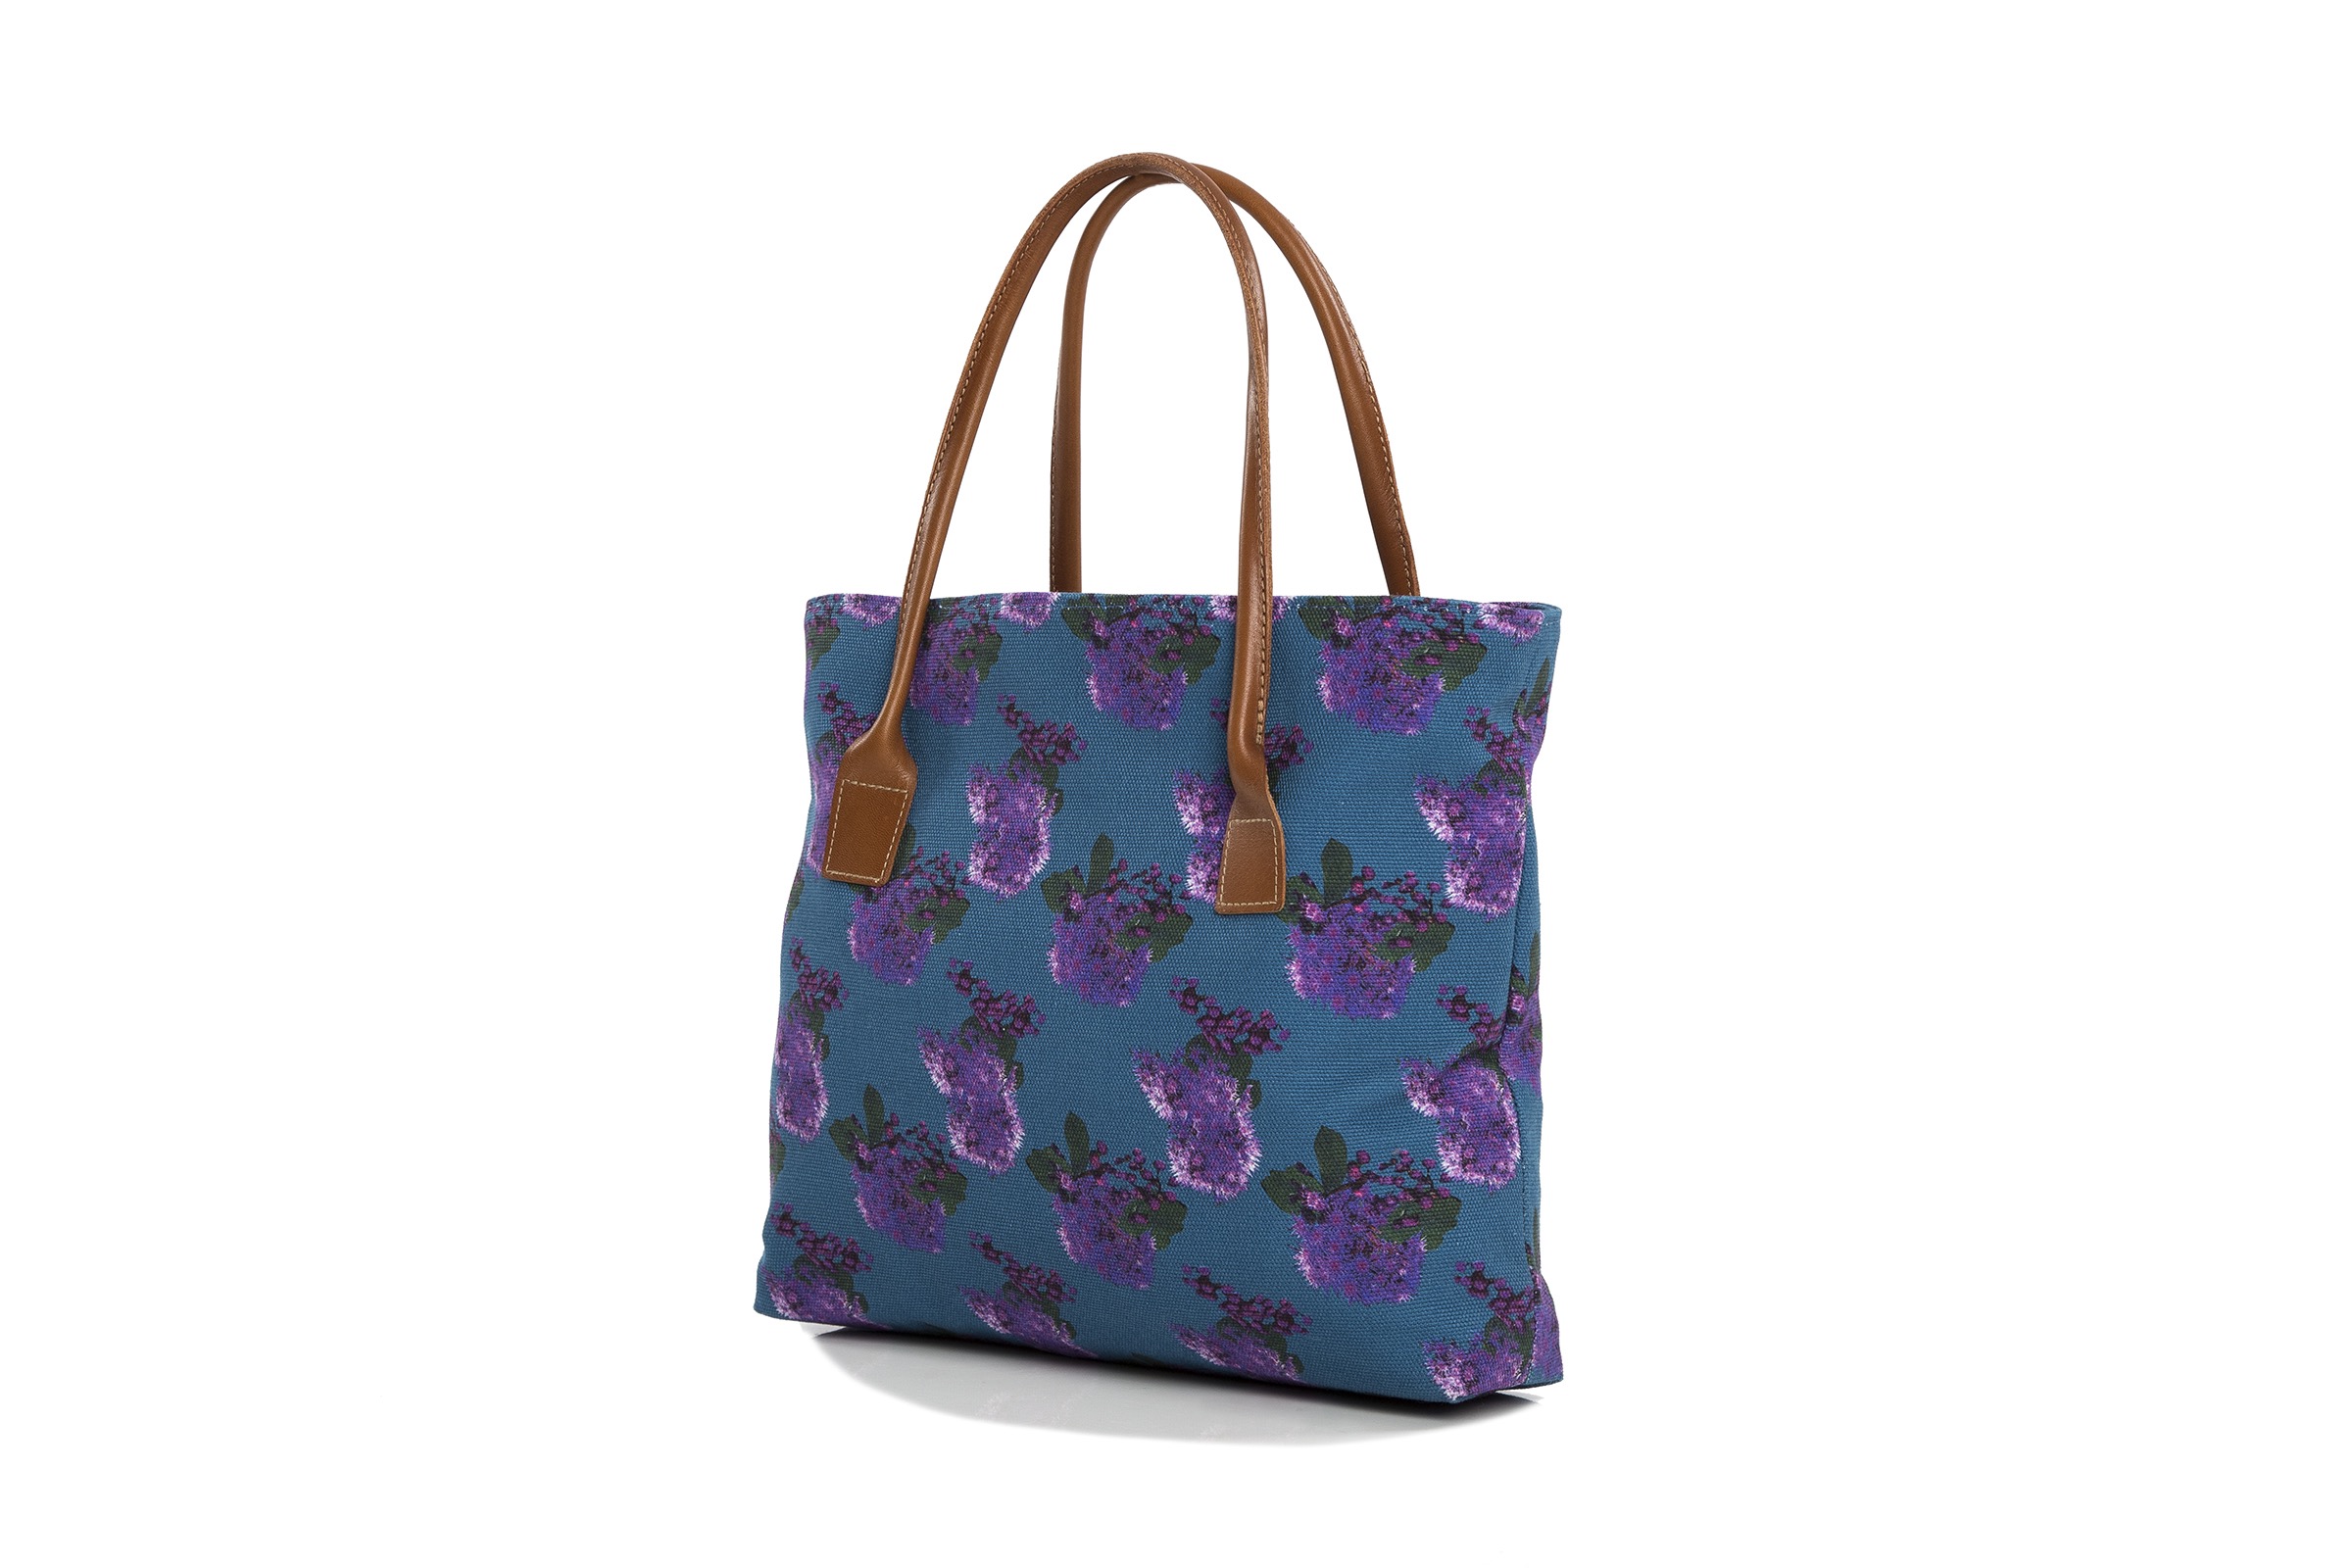 tote bag;
Wycombe Road flowers